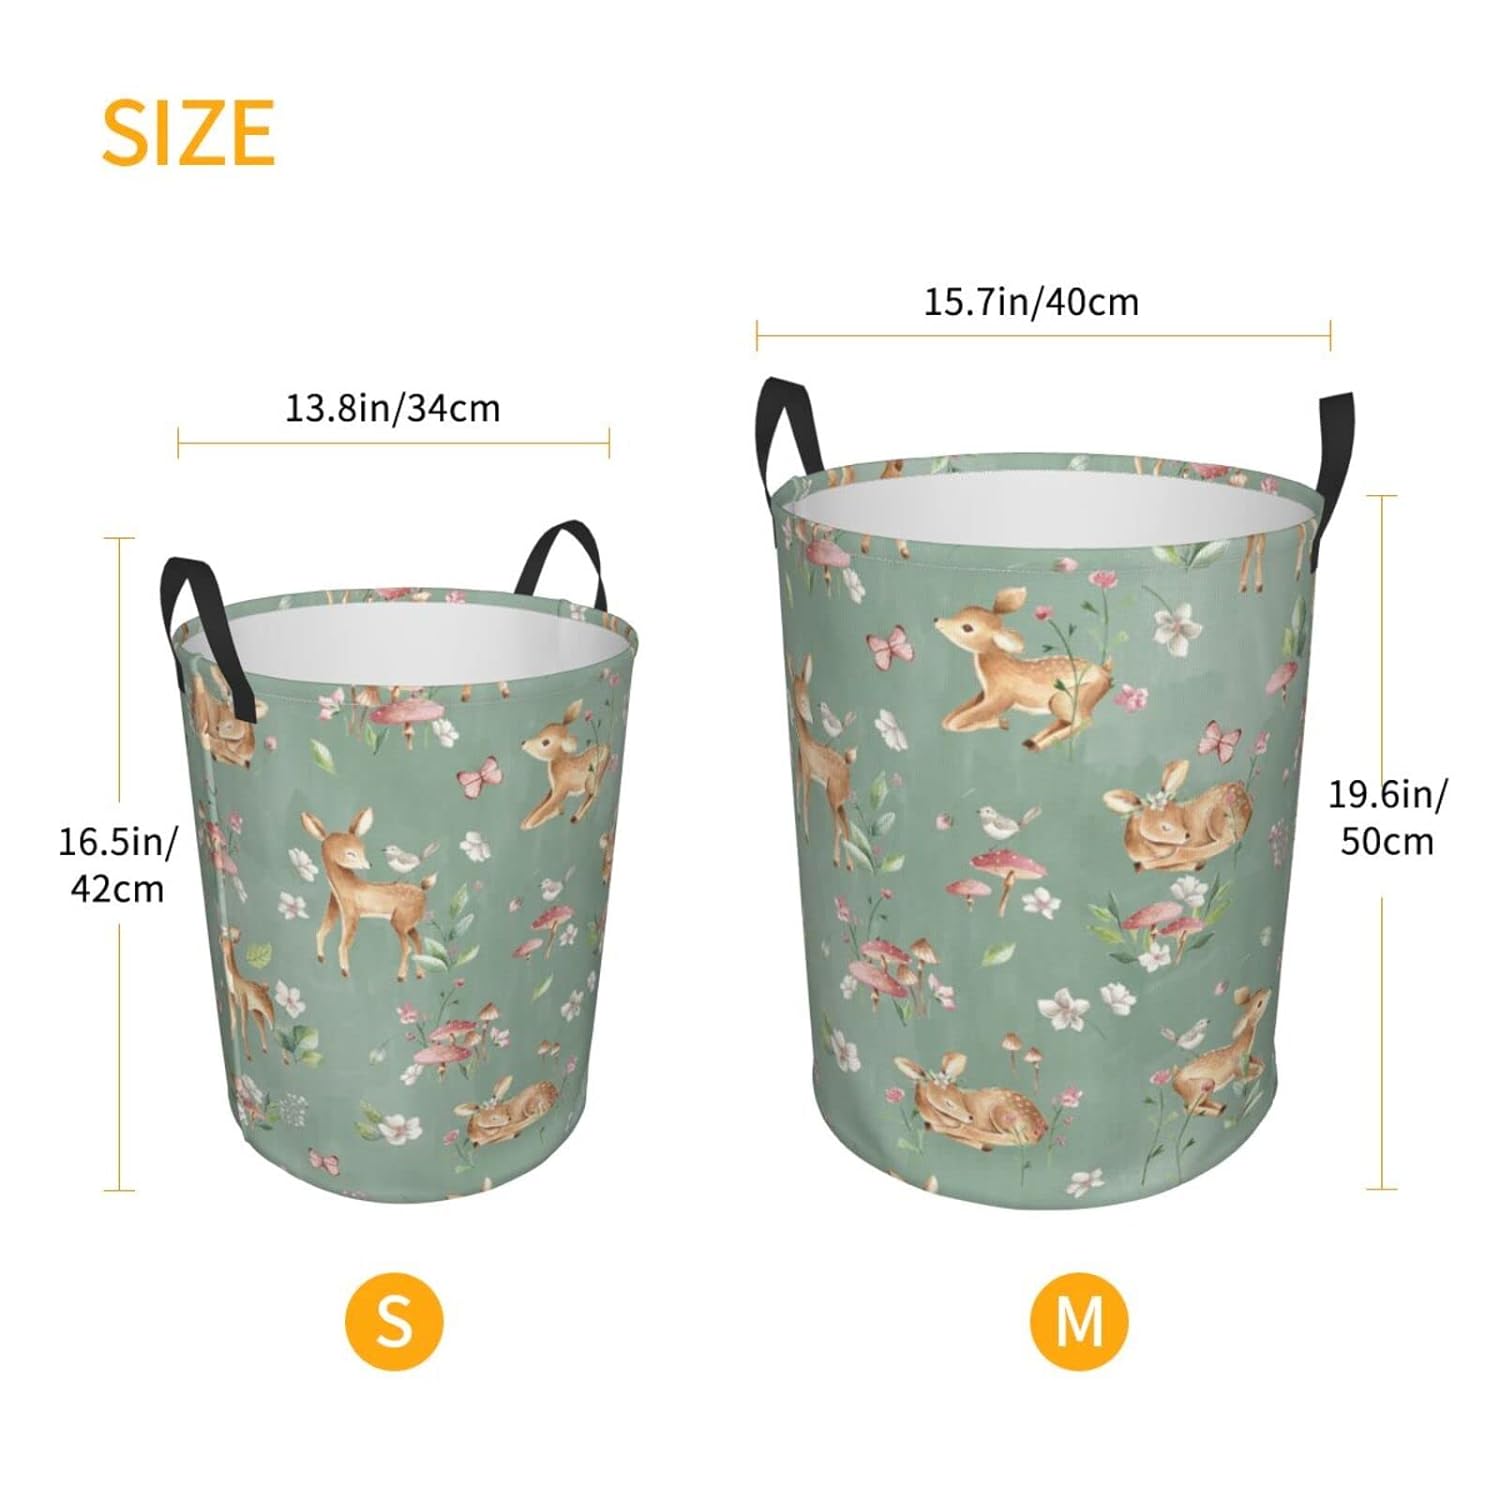 Great Choice Products 38L Round Laundry Hamper Cute Deers Storage Basket Waterproof Coating Woodland Forest Animals Butterflies And Flowers Orga